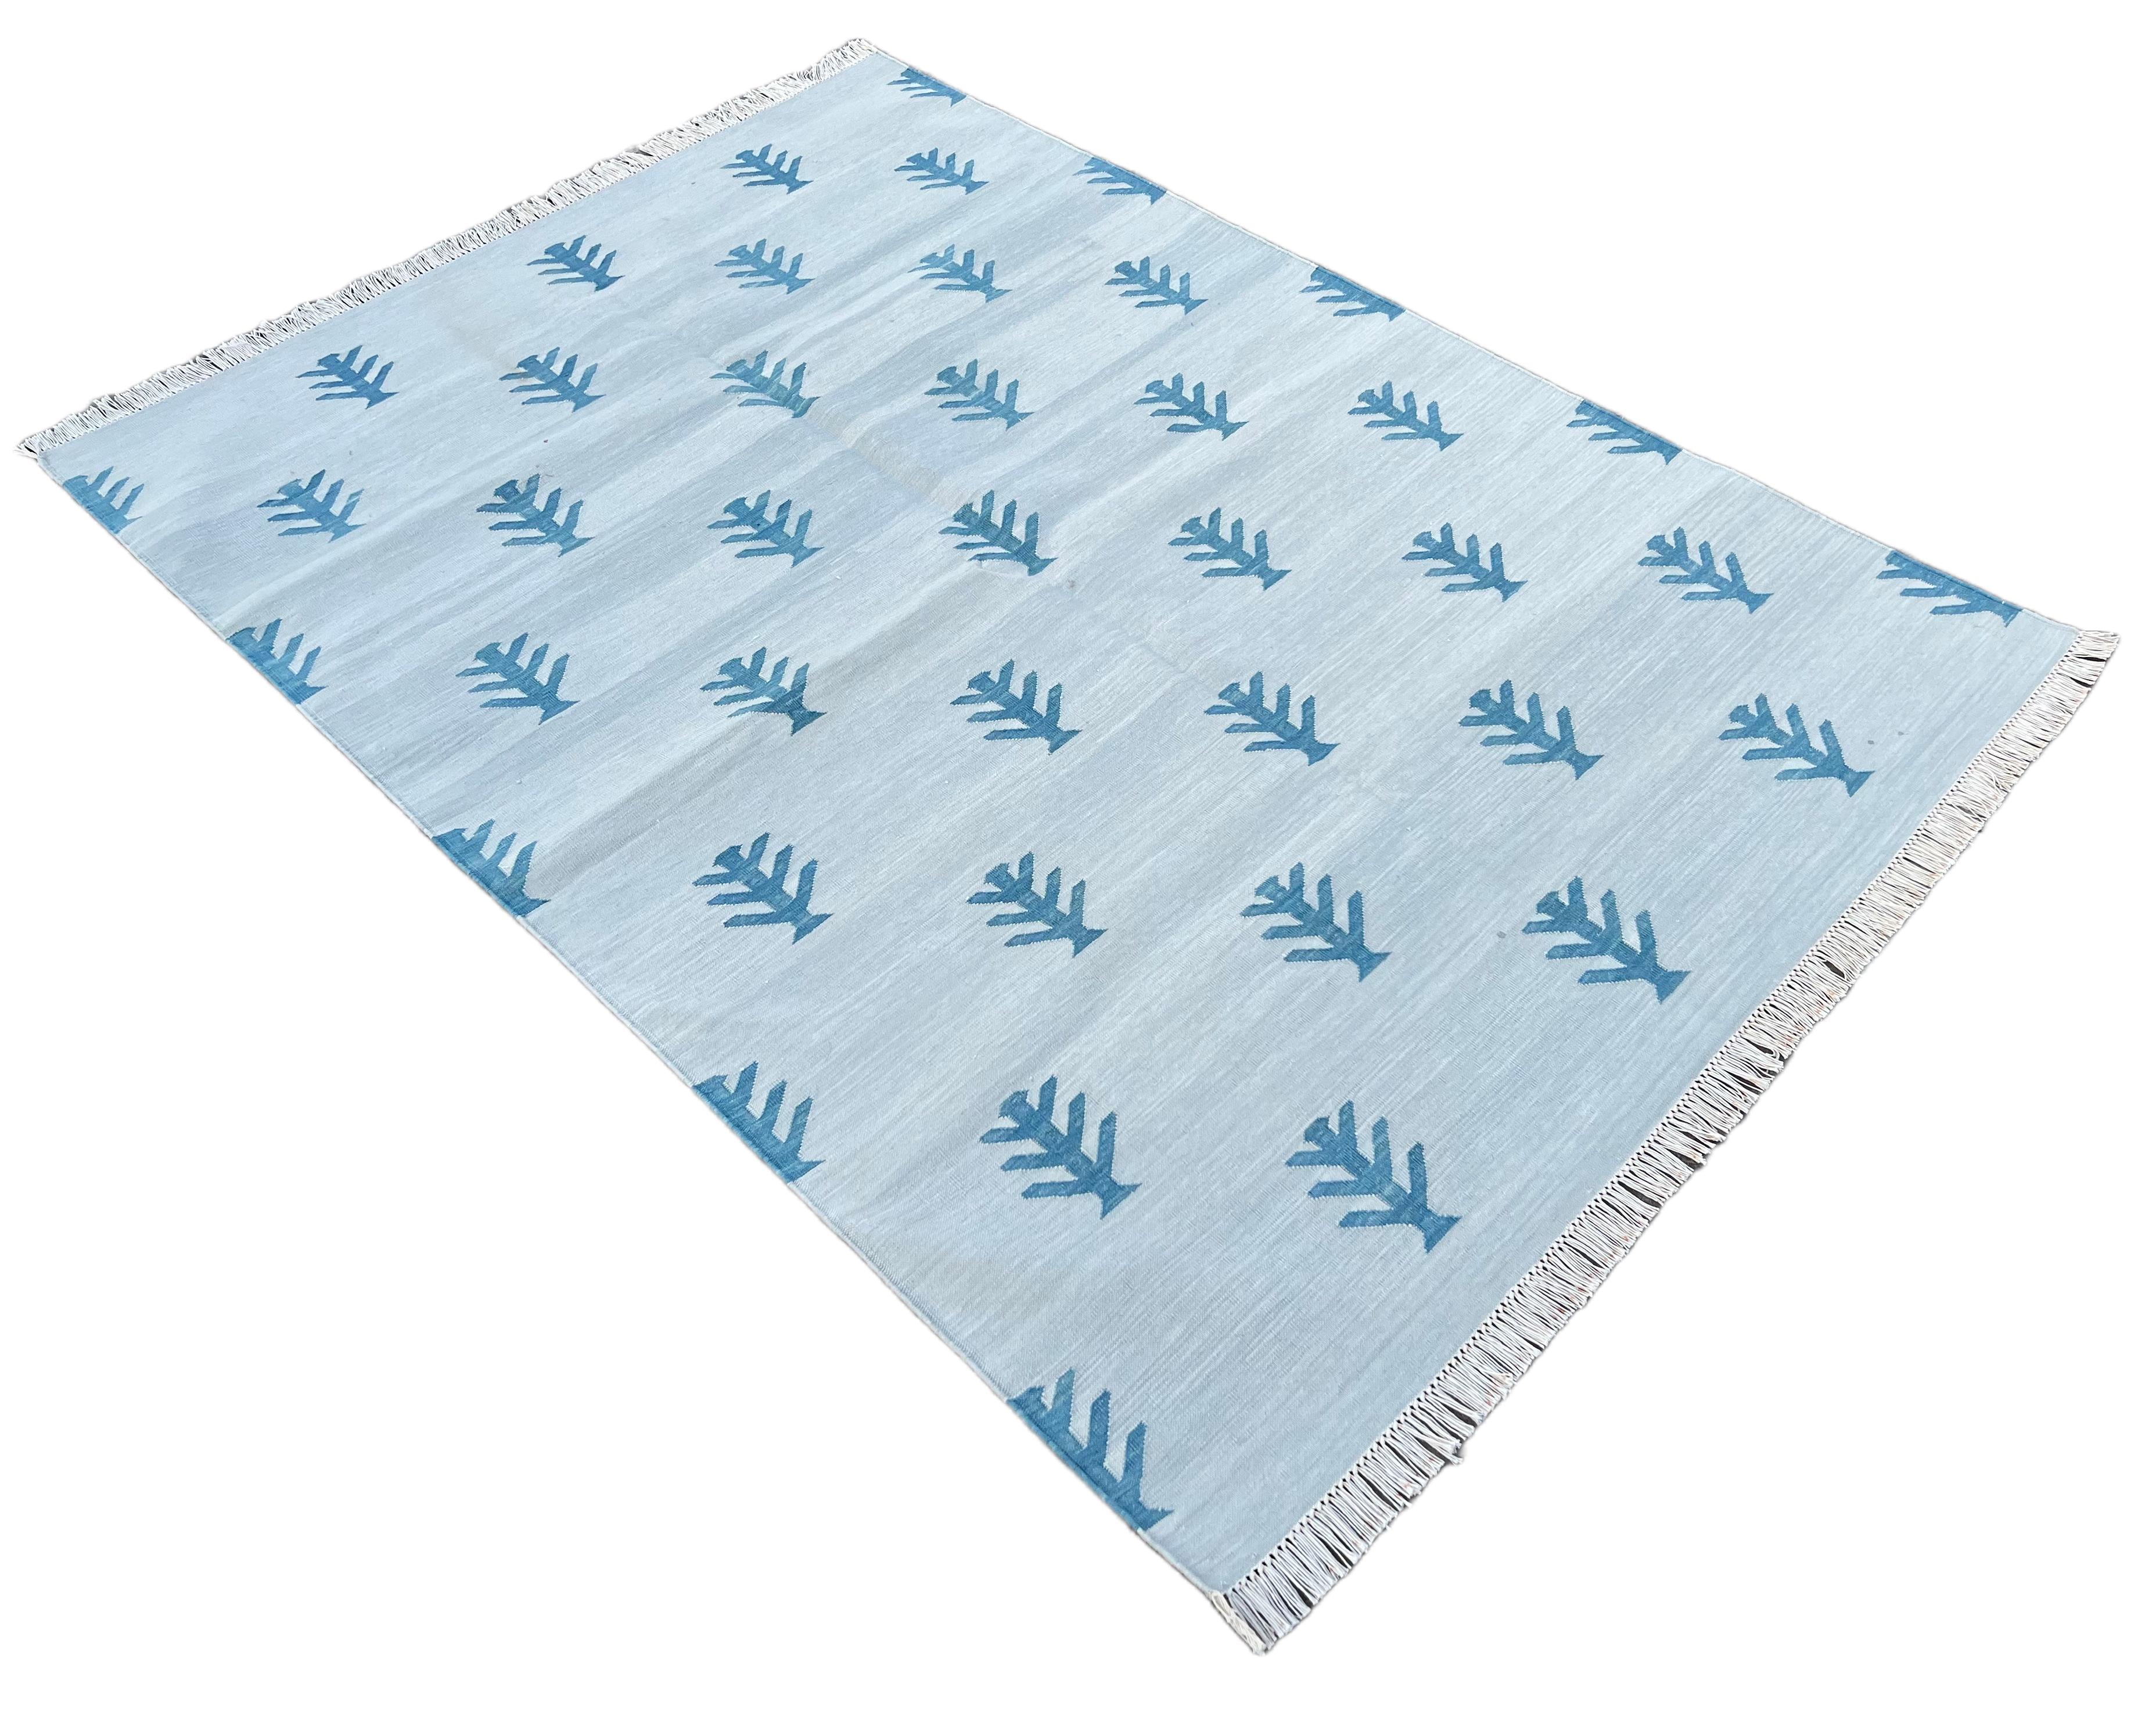 Cotton Vegetable Dyed Pale Aqua And Teal Blue Tree Patterned Indian Dhurrie Rug-4'x6' 

These special flat-weave dhurries are hand-woven with 15 ply 100% cotton yarn. Due to the special manufacturing techniques used to create our rugs, the size and